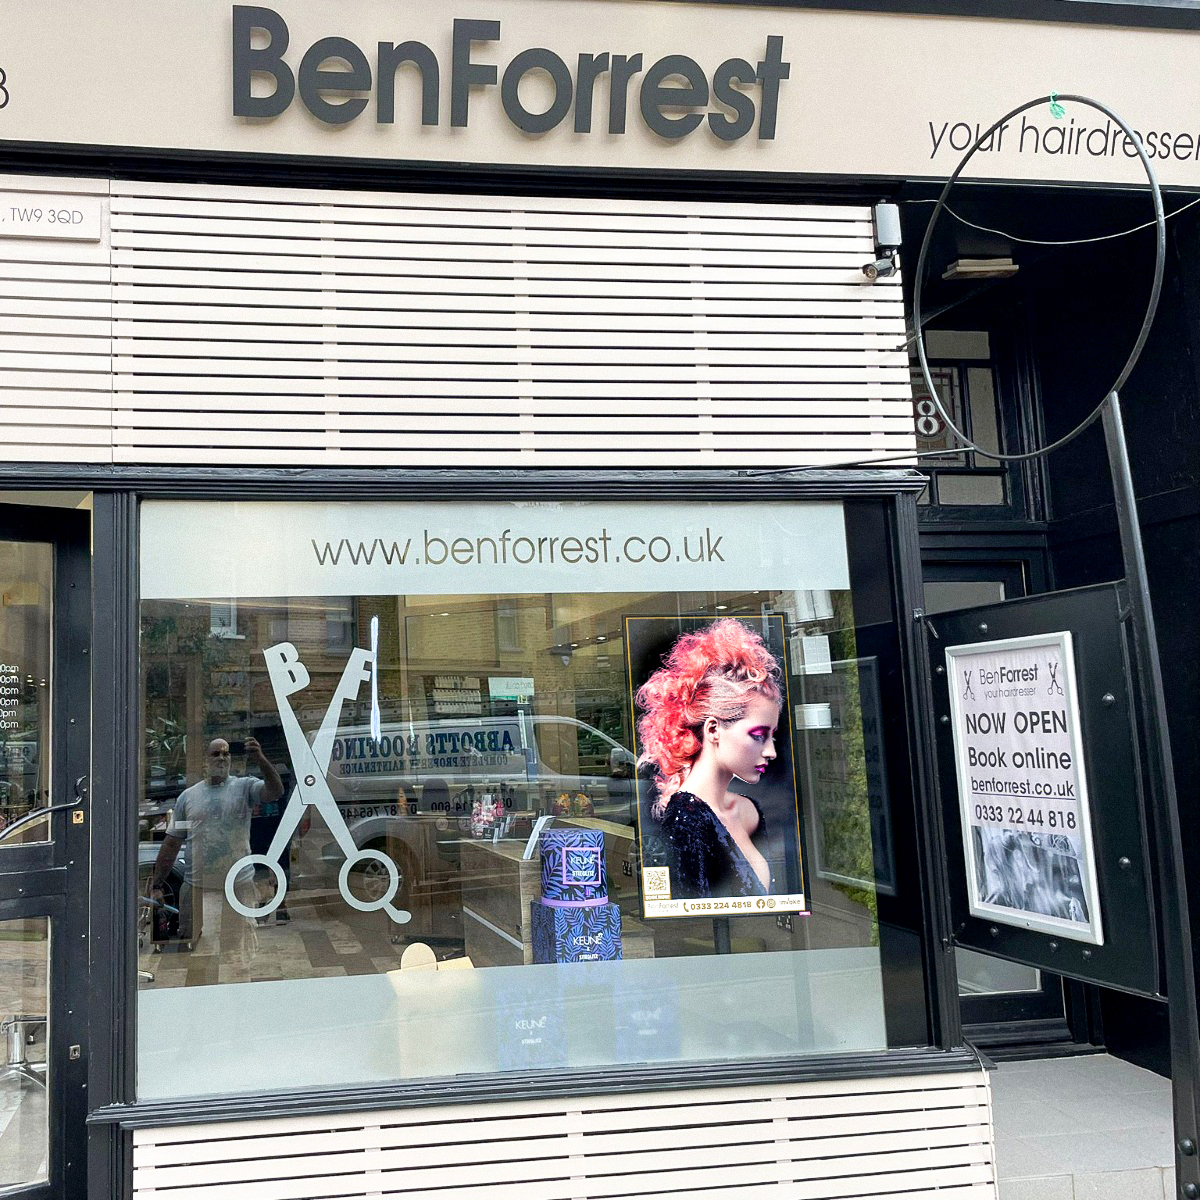 ben forrest hairdressers digital window advert to stand out and draw customers in with unique hairstyle advert